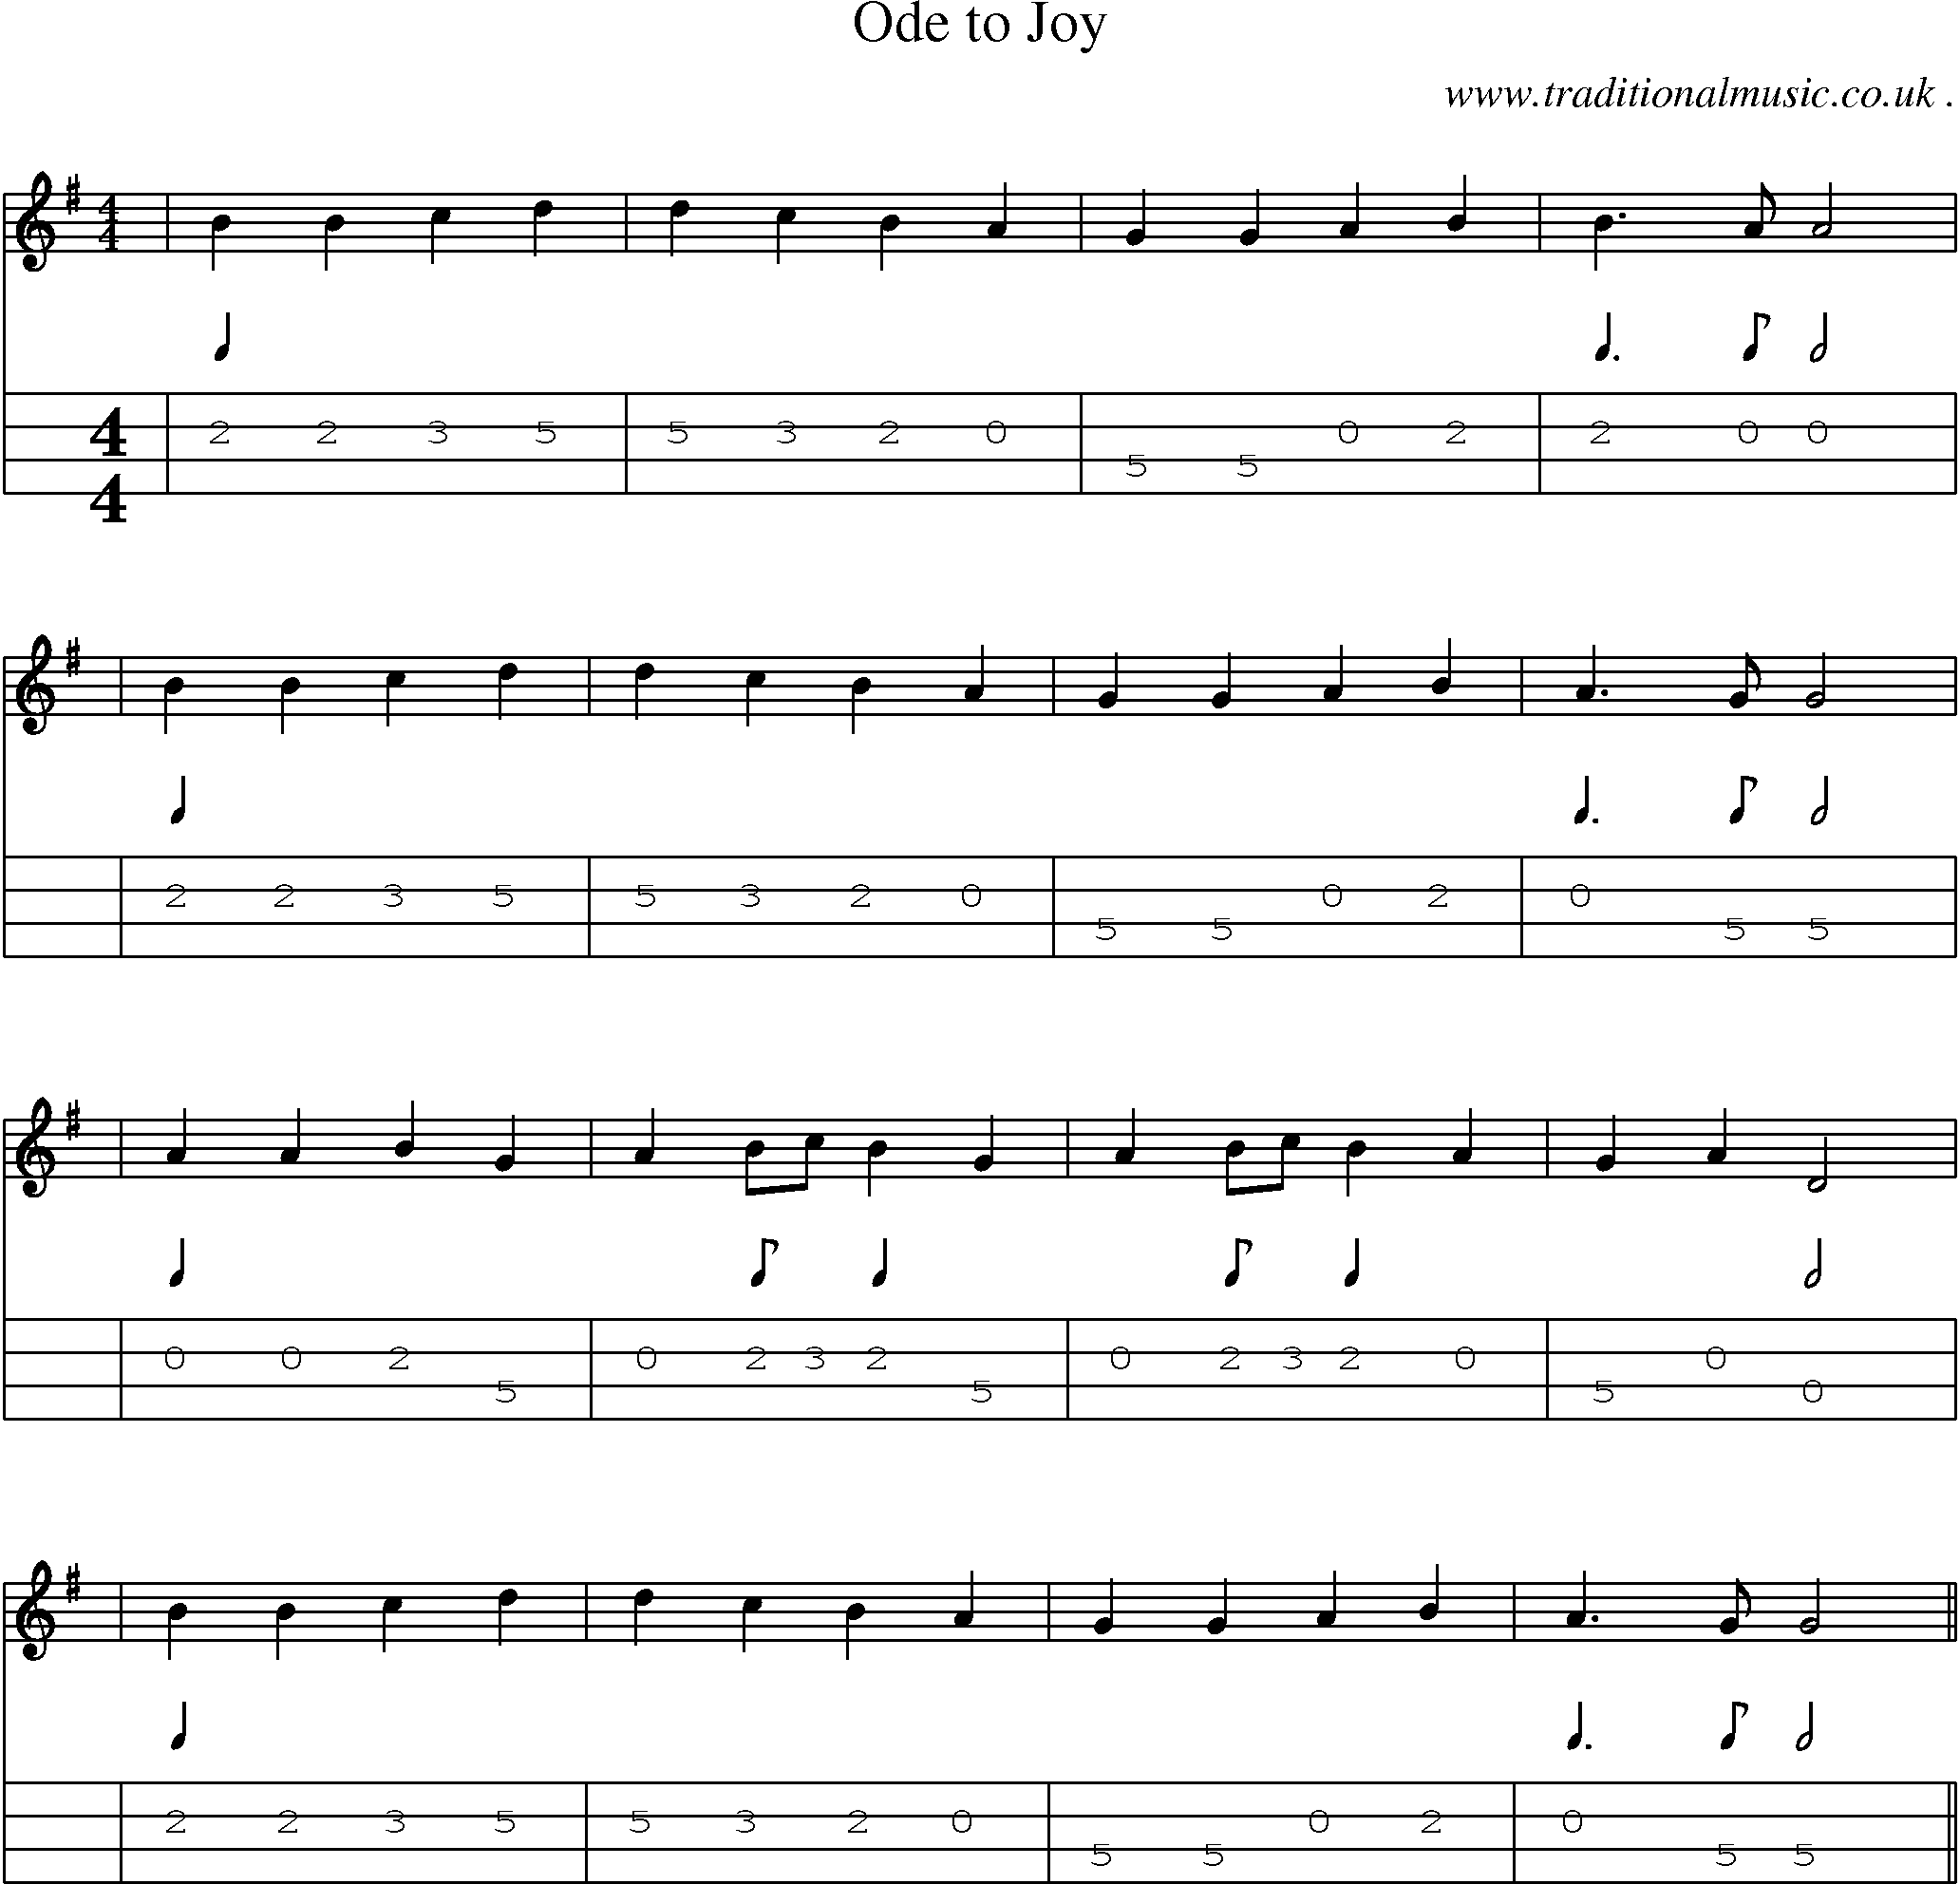 Music Score and Guitar Tabs for Ode To Joy